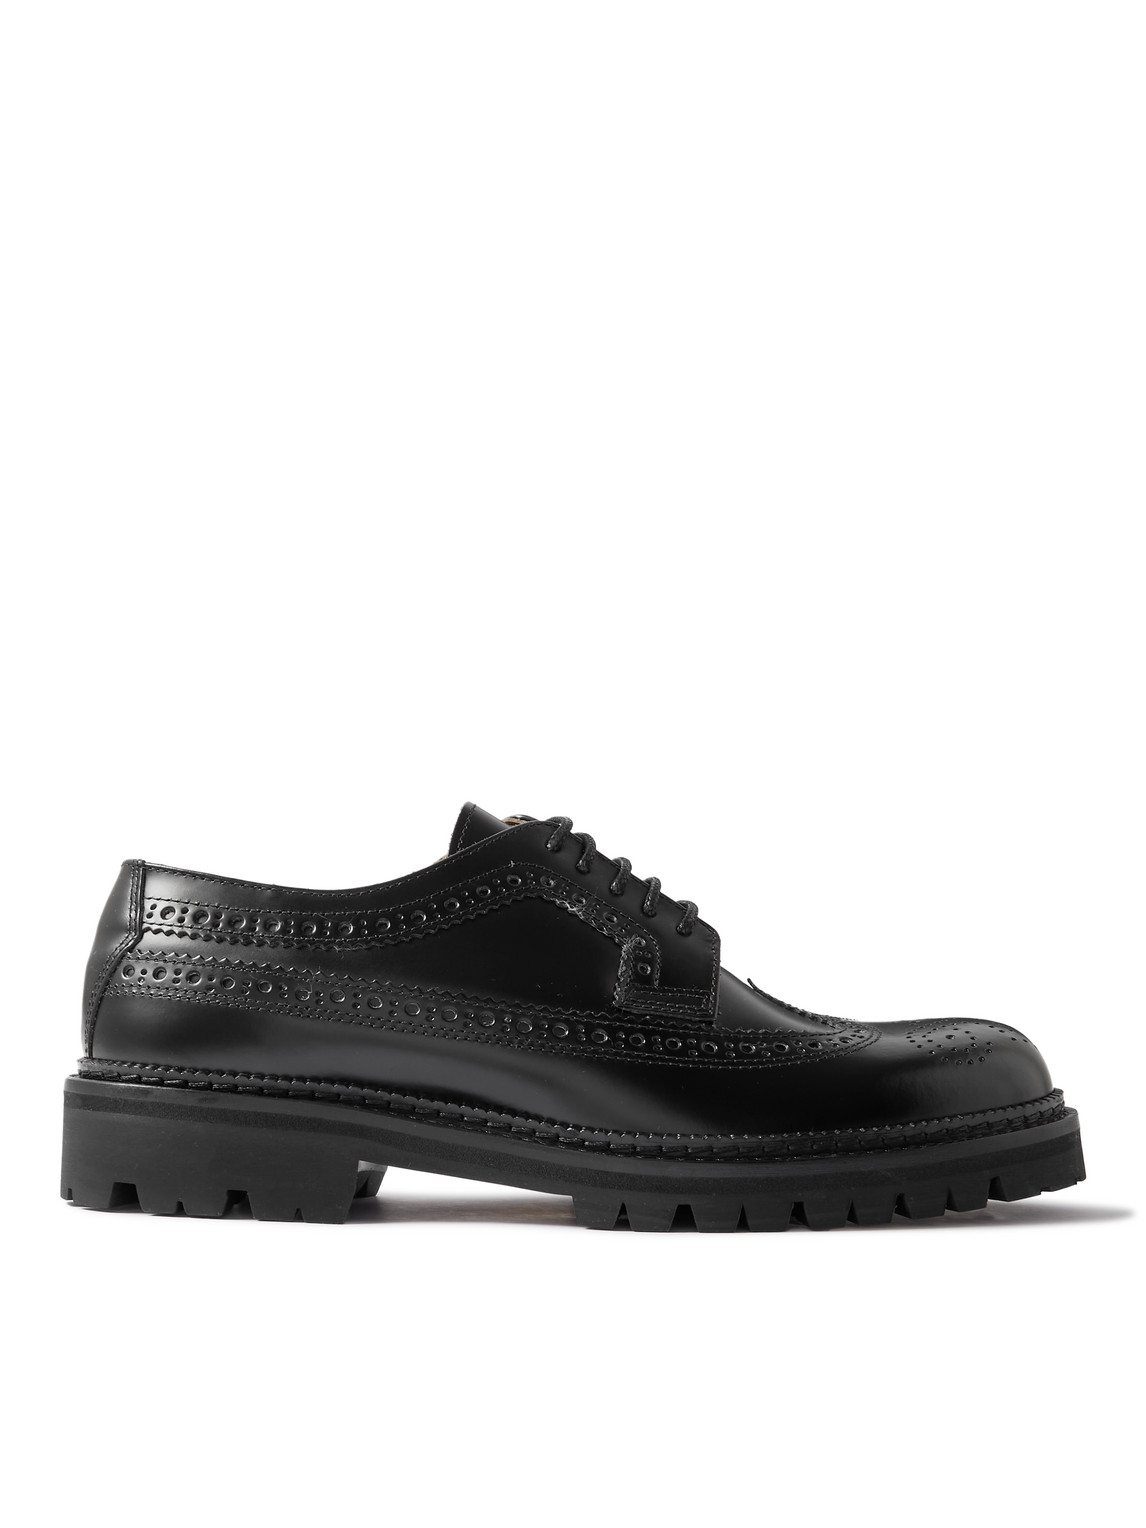 Mr P. Jaques Leather Brogues In Black